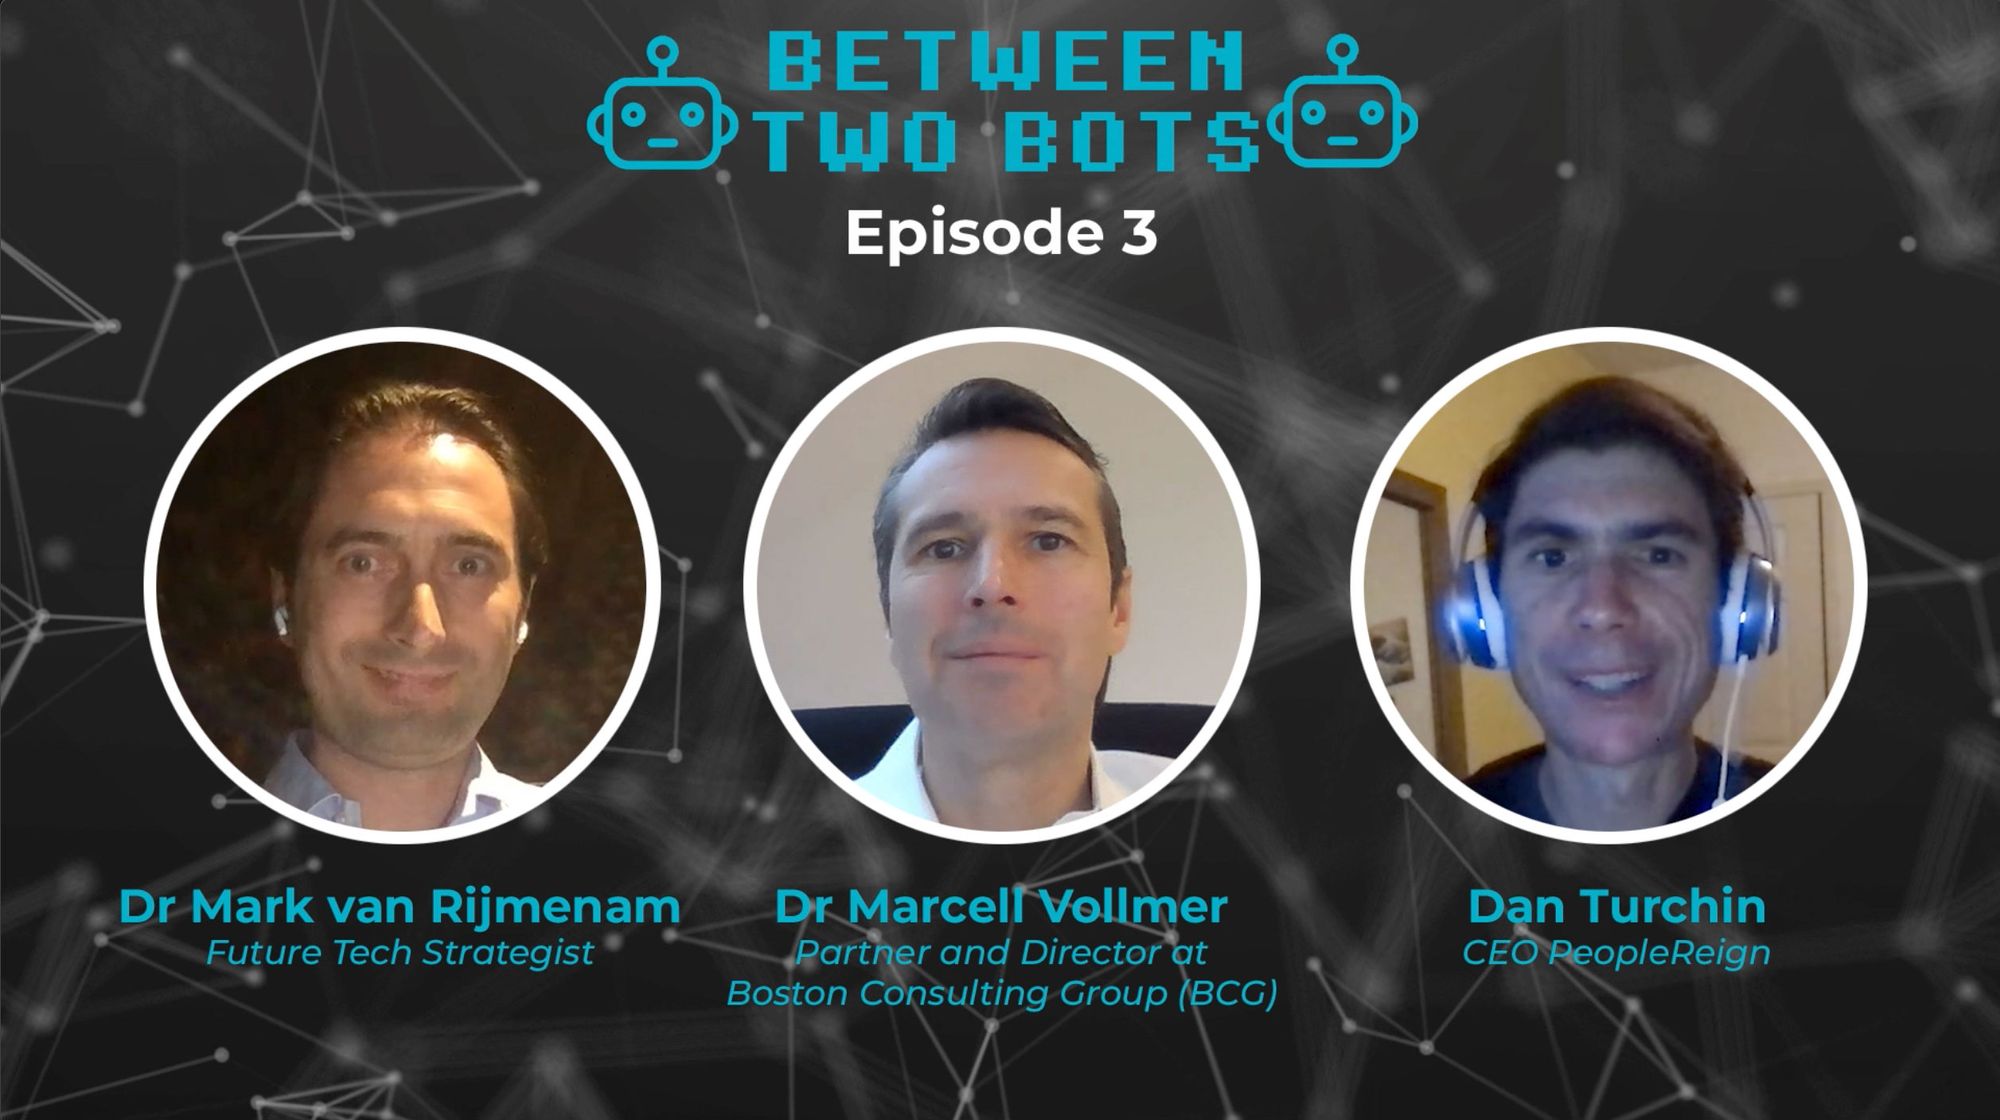 EP03 - Between Two Bots with Dr. Marcell Vollmer